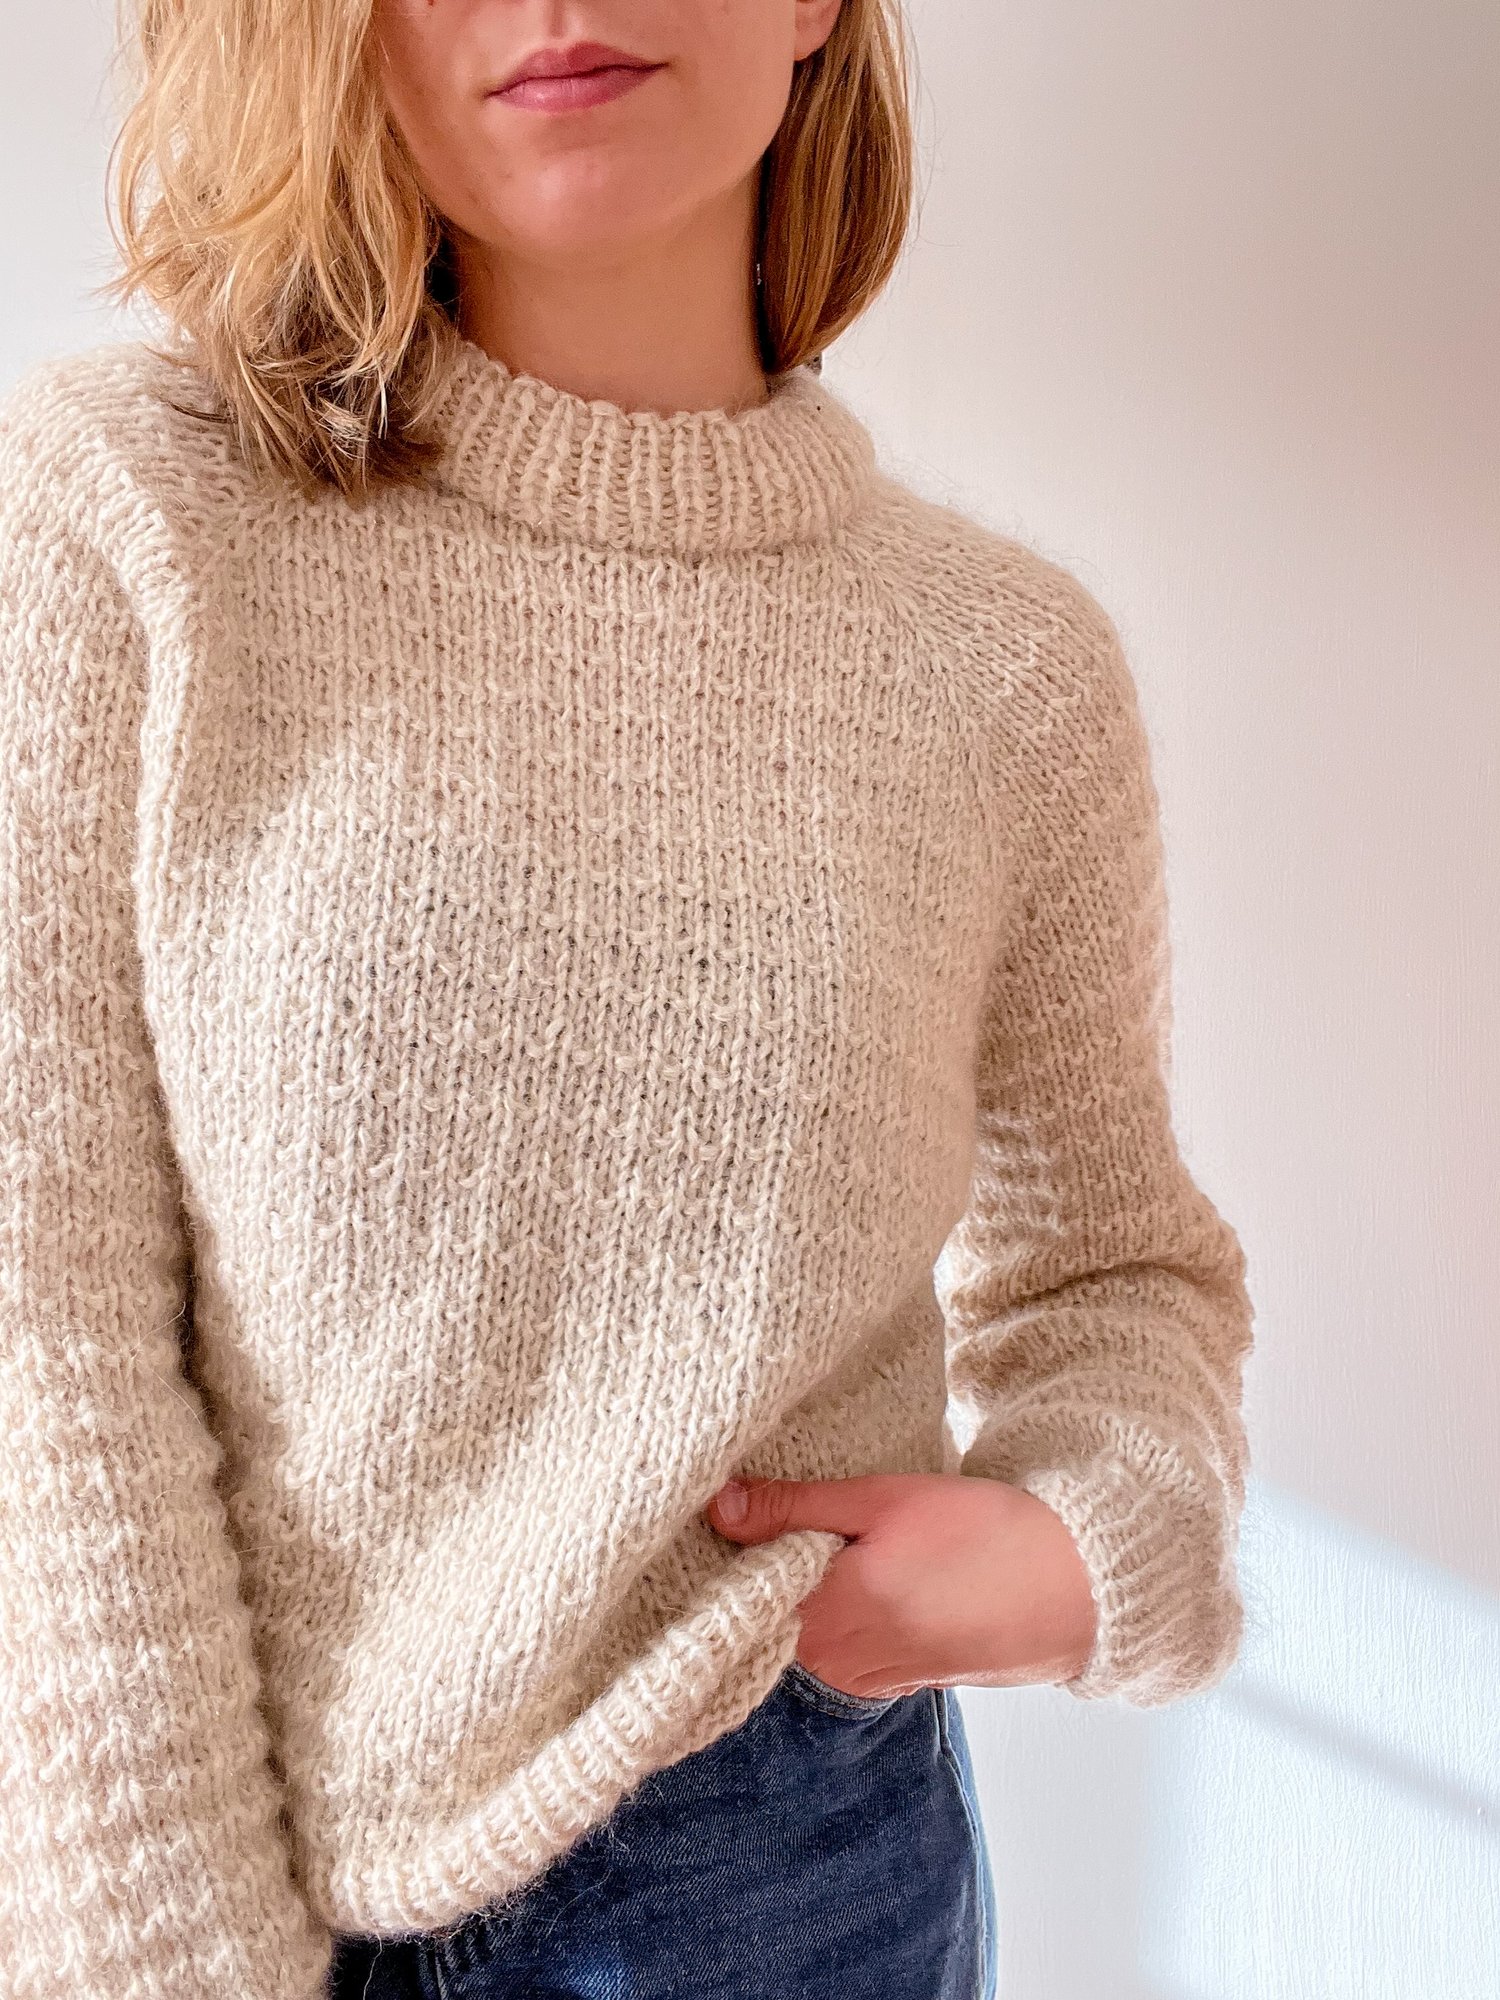 Sweater (3.0) Knit Girl Purl — The Aosta